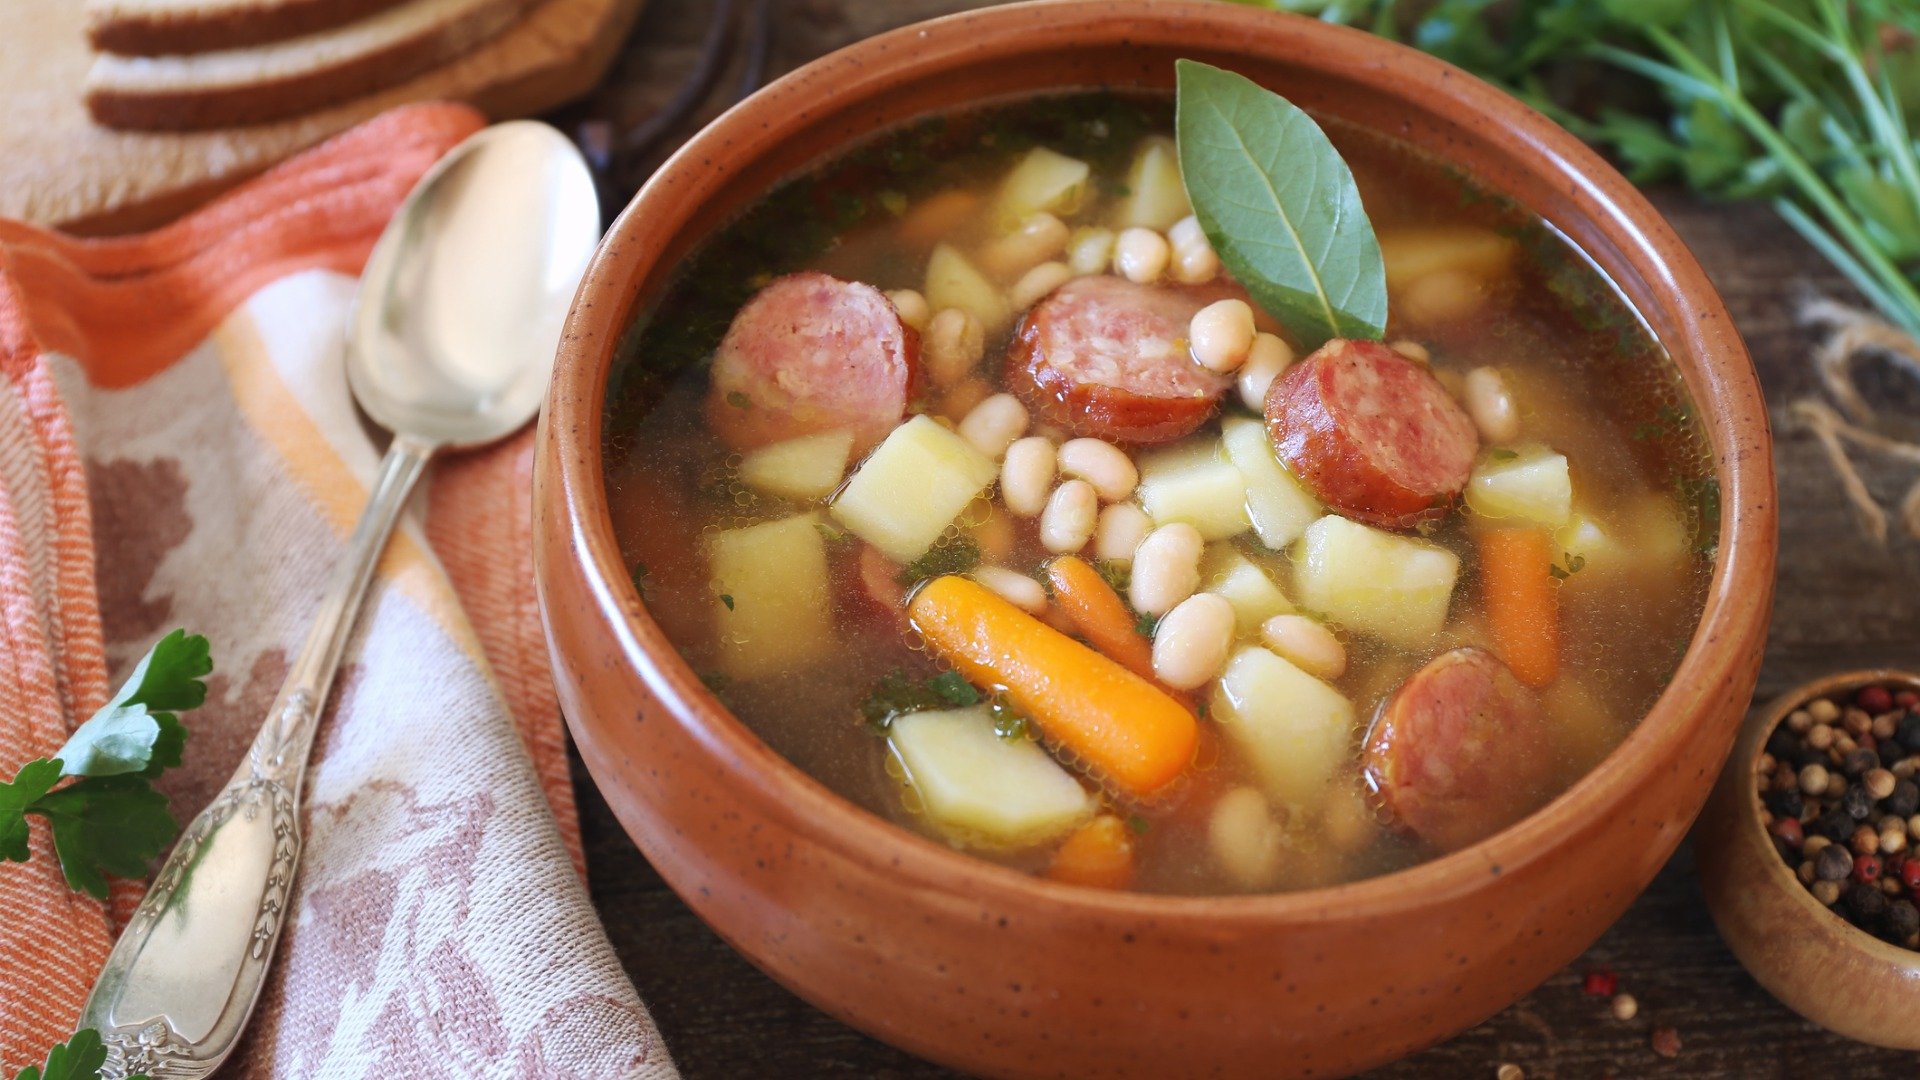 This image shows a bowl of Caldo Gallego and a spoon next to it. In the soup, there are pieces of sausage, white beans, carrots, and other vegetables. 